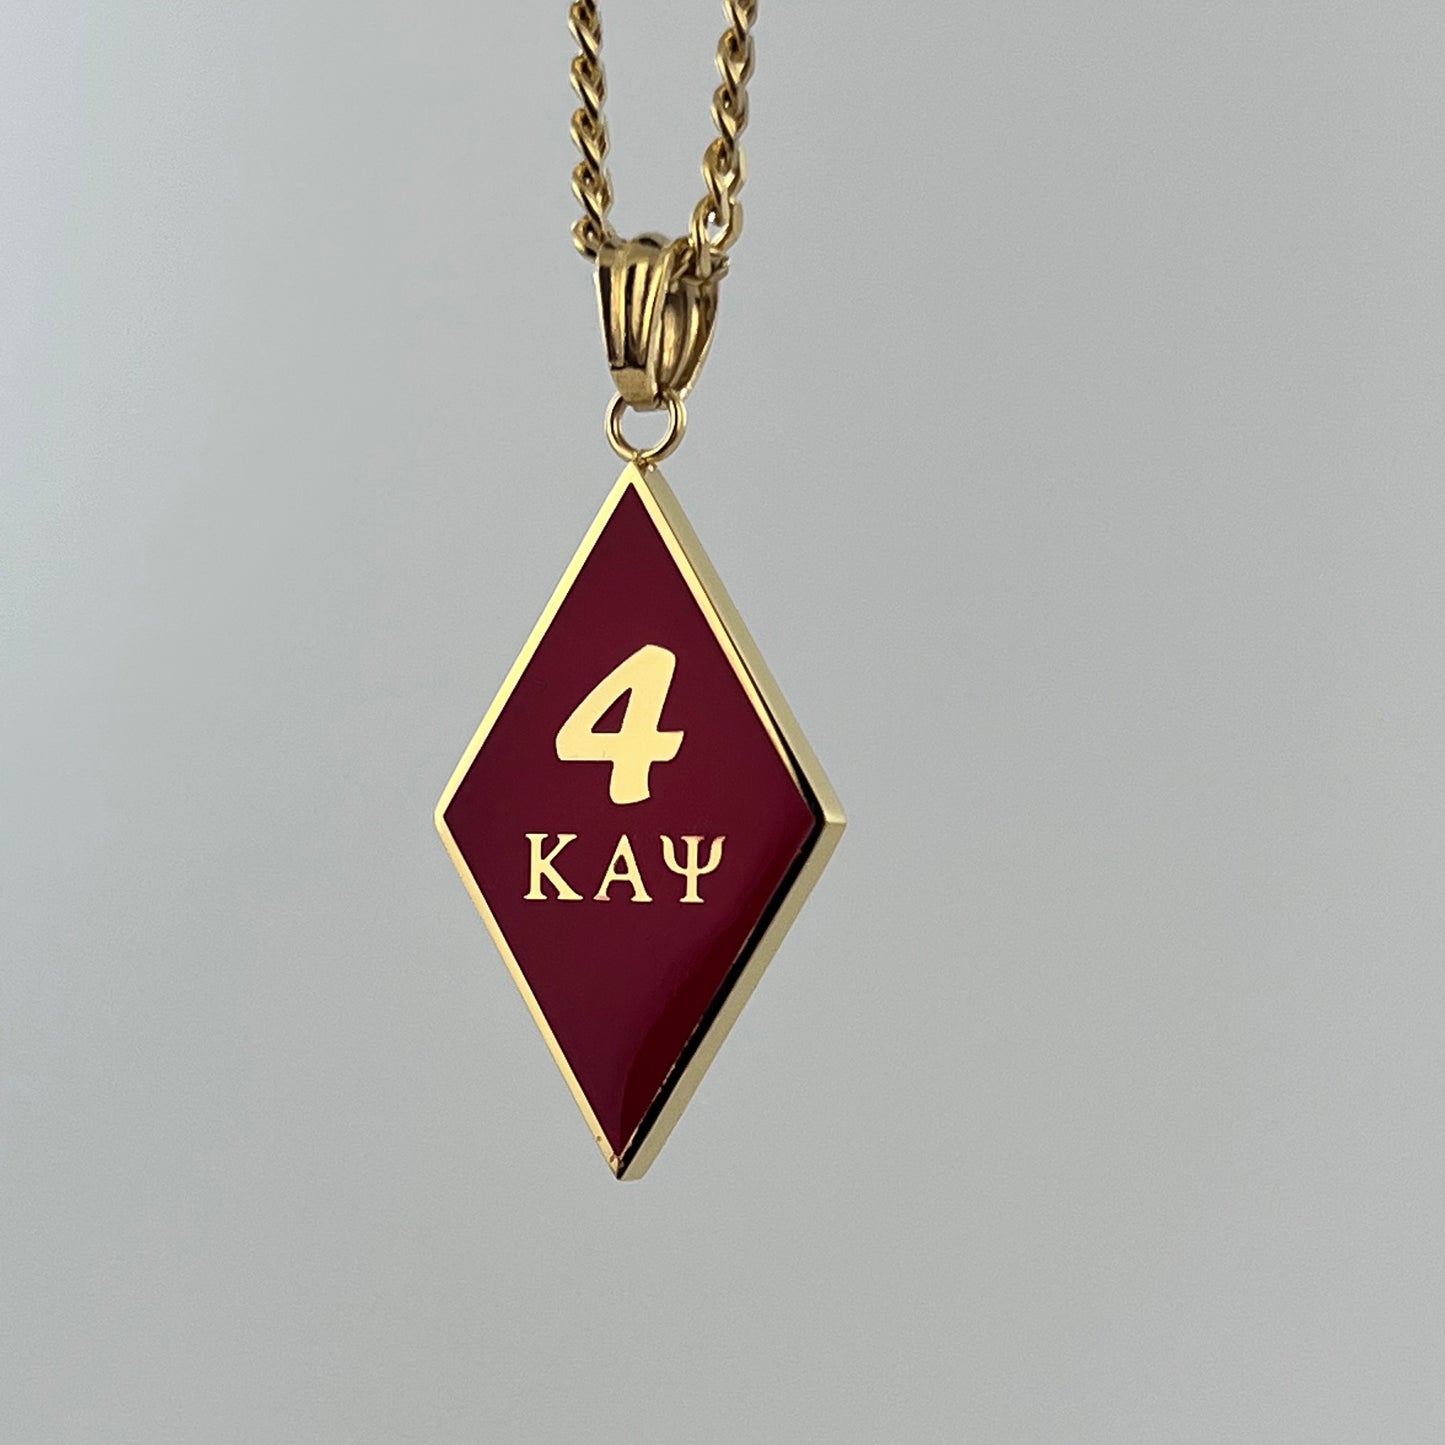 Kappa Alpha Psi necklace/Jewelry and charm. Rep your Klub.   A beyond stunning Kappa Alpha Psi necklace and charm made with Silver. This pendant is made to last for generations and generations, perfect for that special Kappa Alpha Psi member. The ultimate gift to show off your fraternity pride is here!  • Official Kappa Alpha Psi Licensed Product: passed through examination and requirements by the Fraternity as a whole.